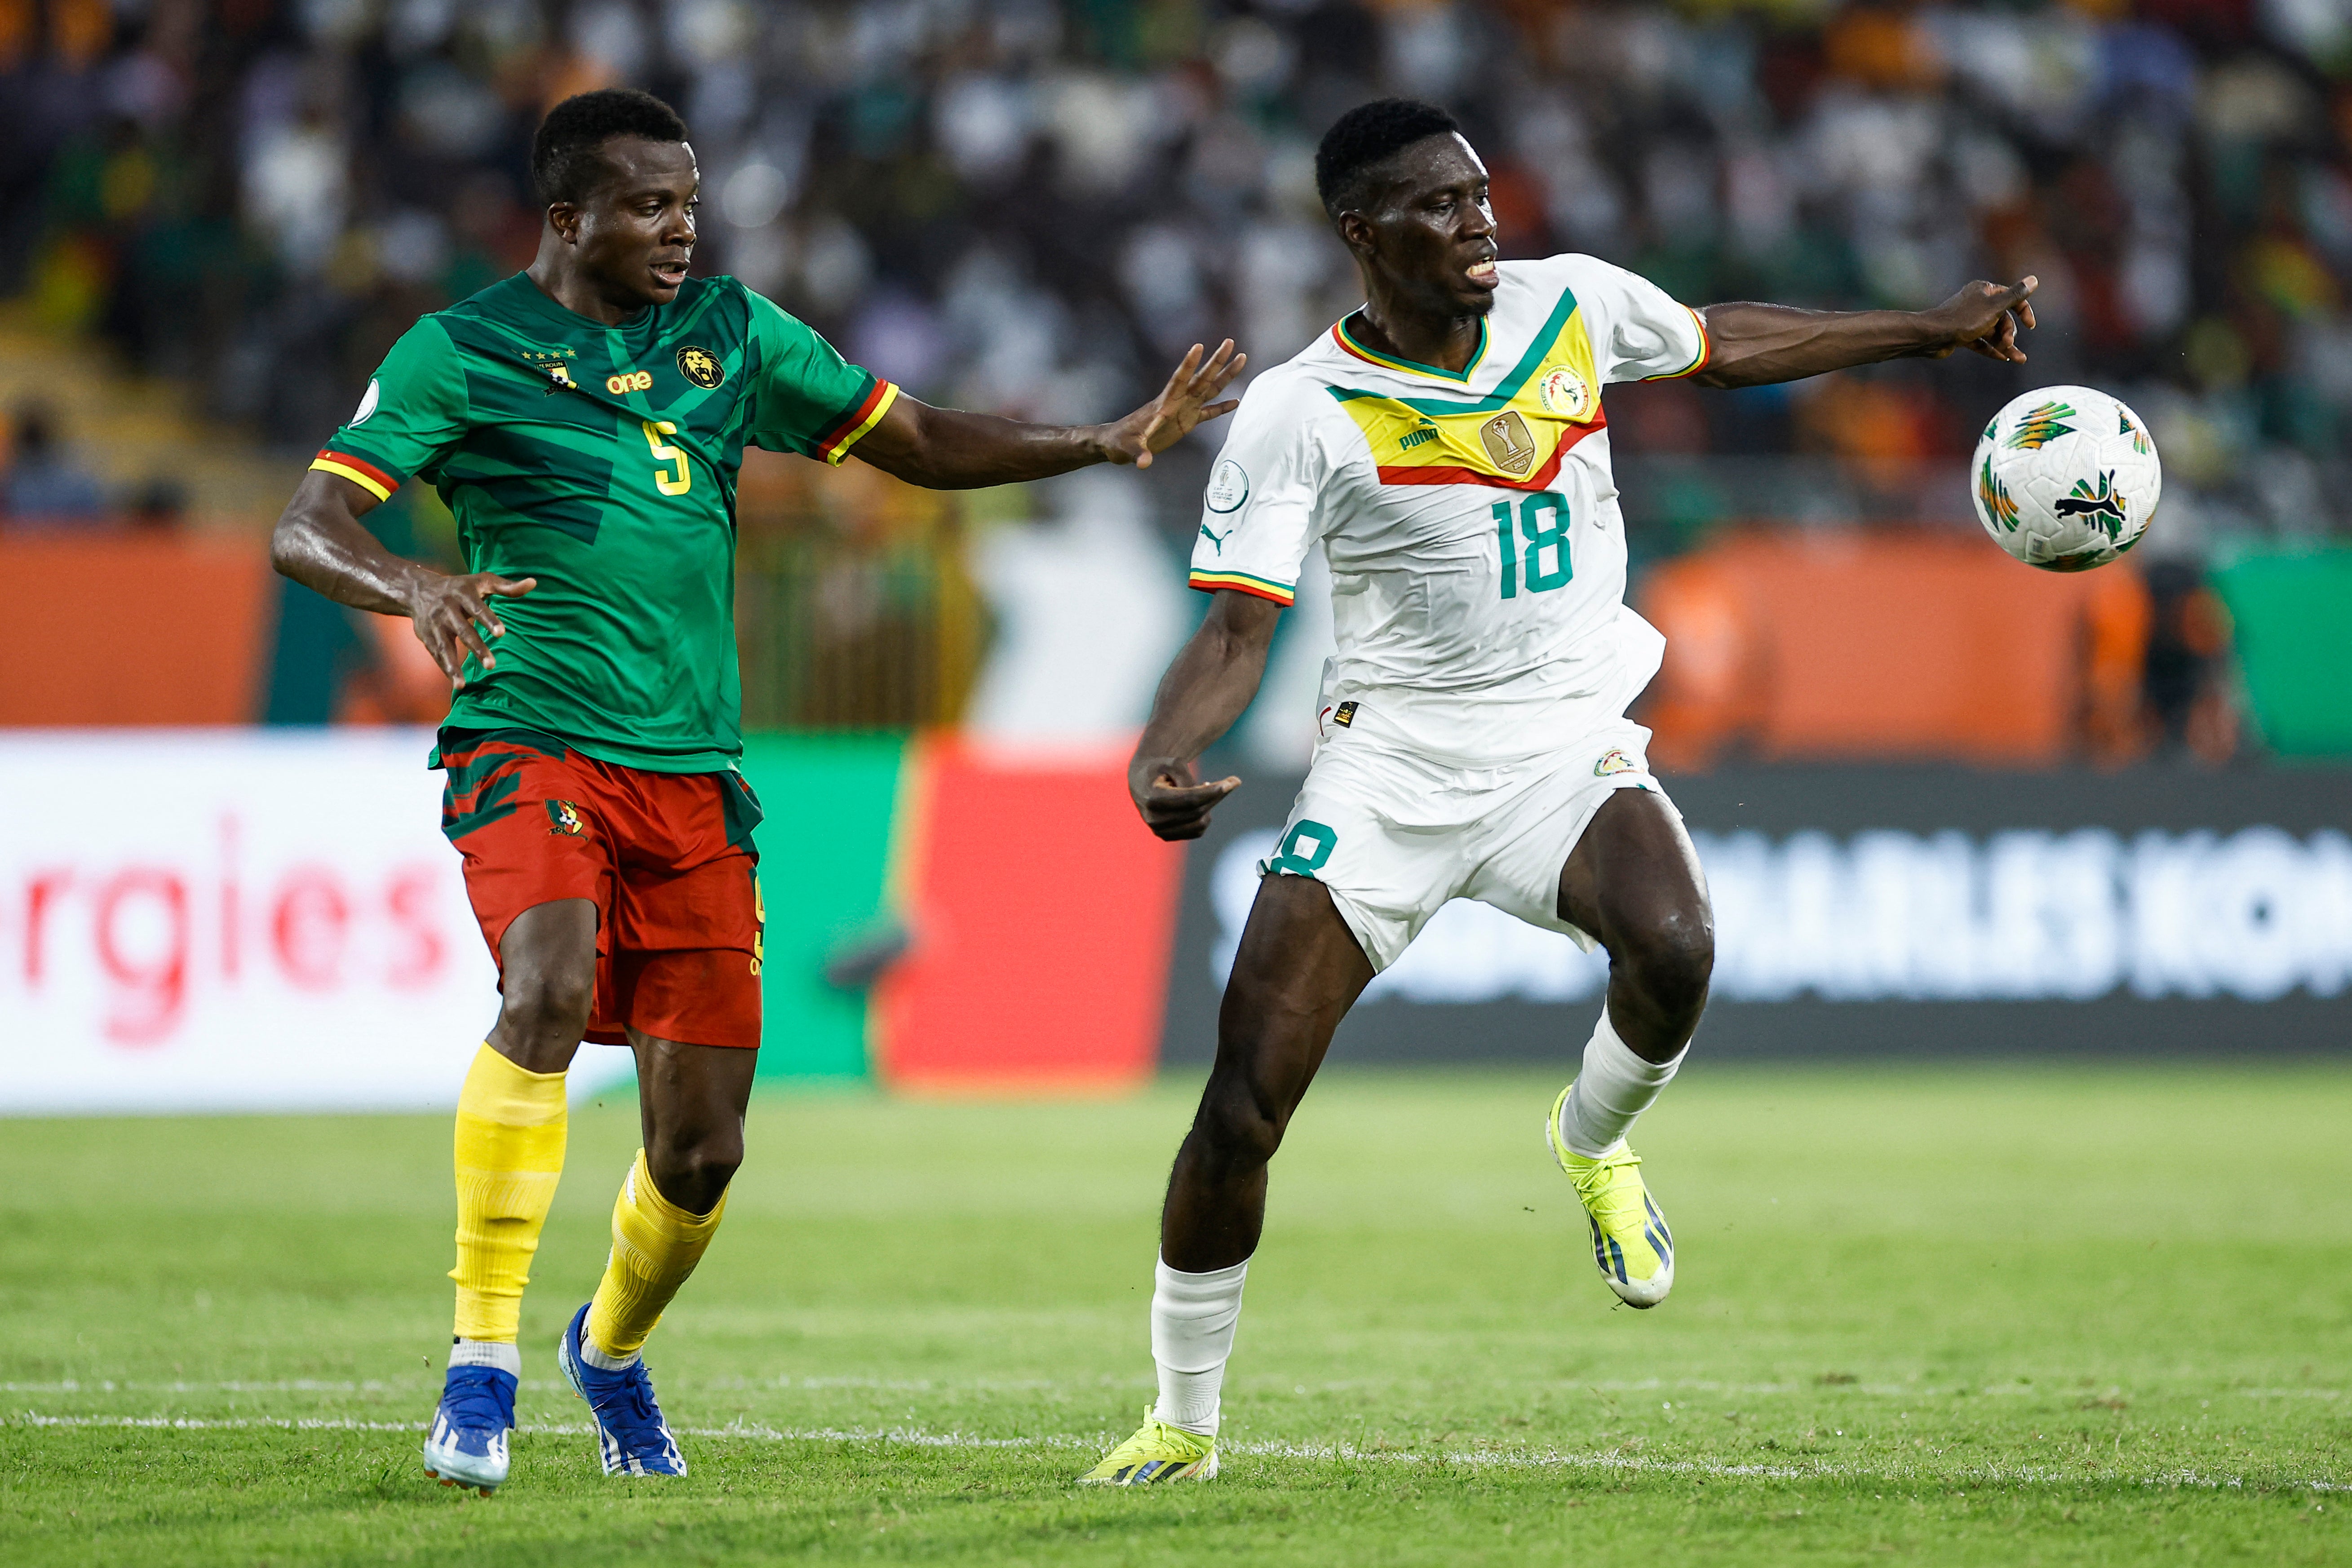 Ismaila Sarr scored and set up a goal as Senegal defeated Cameroon